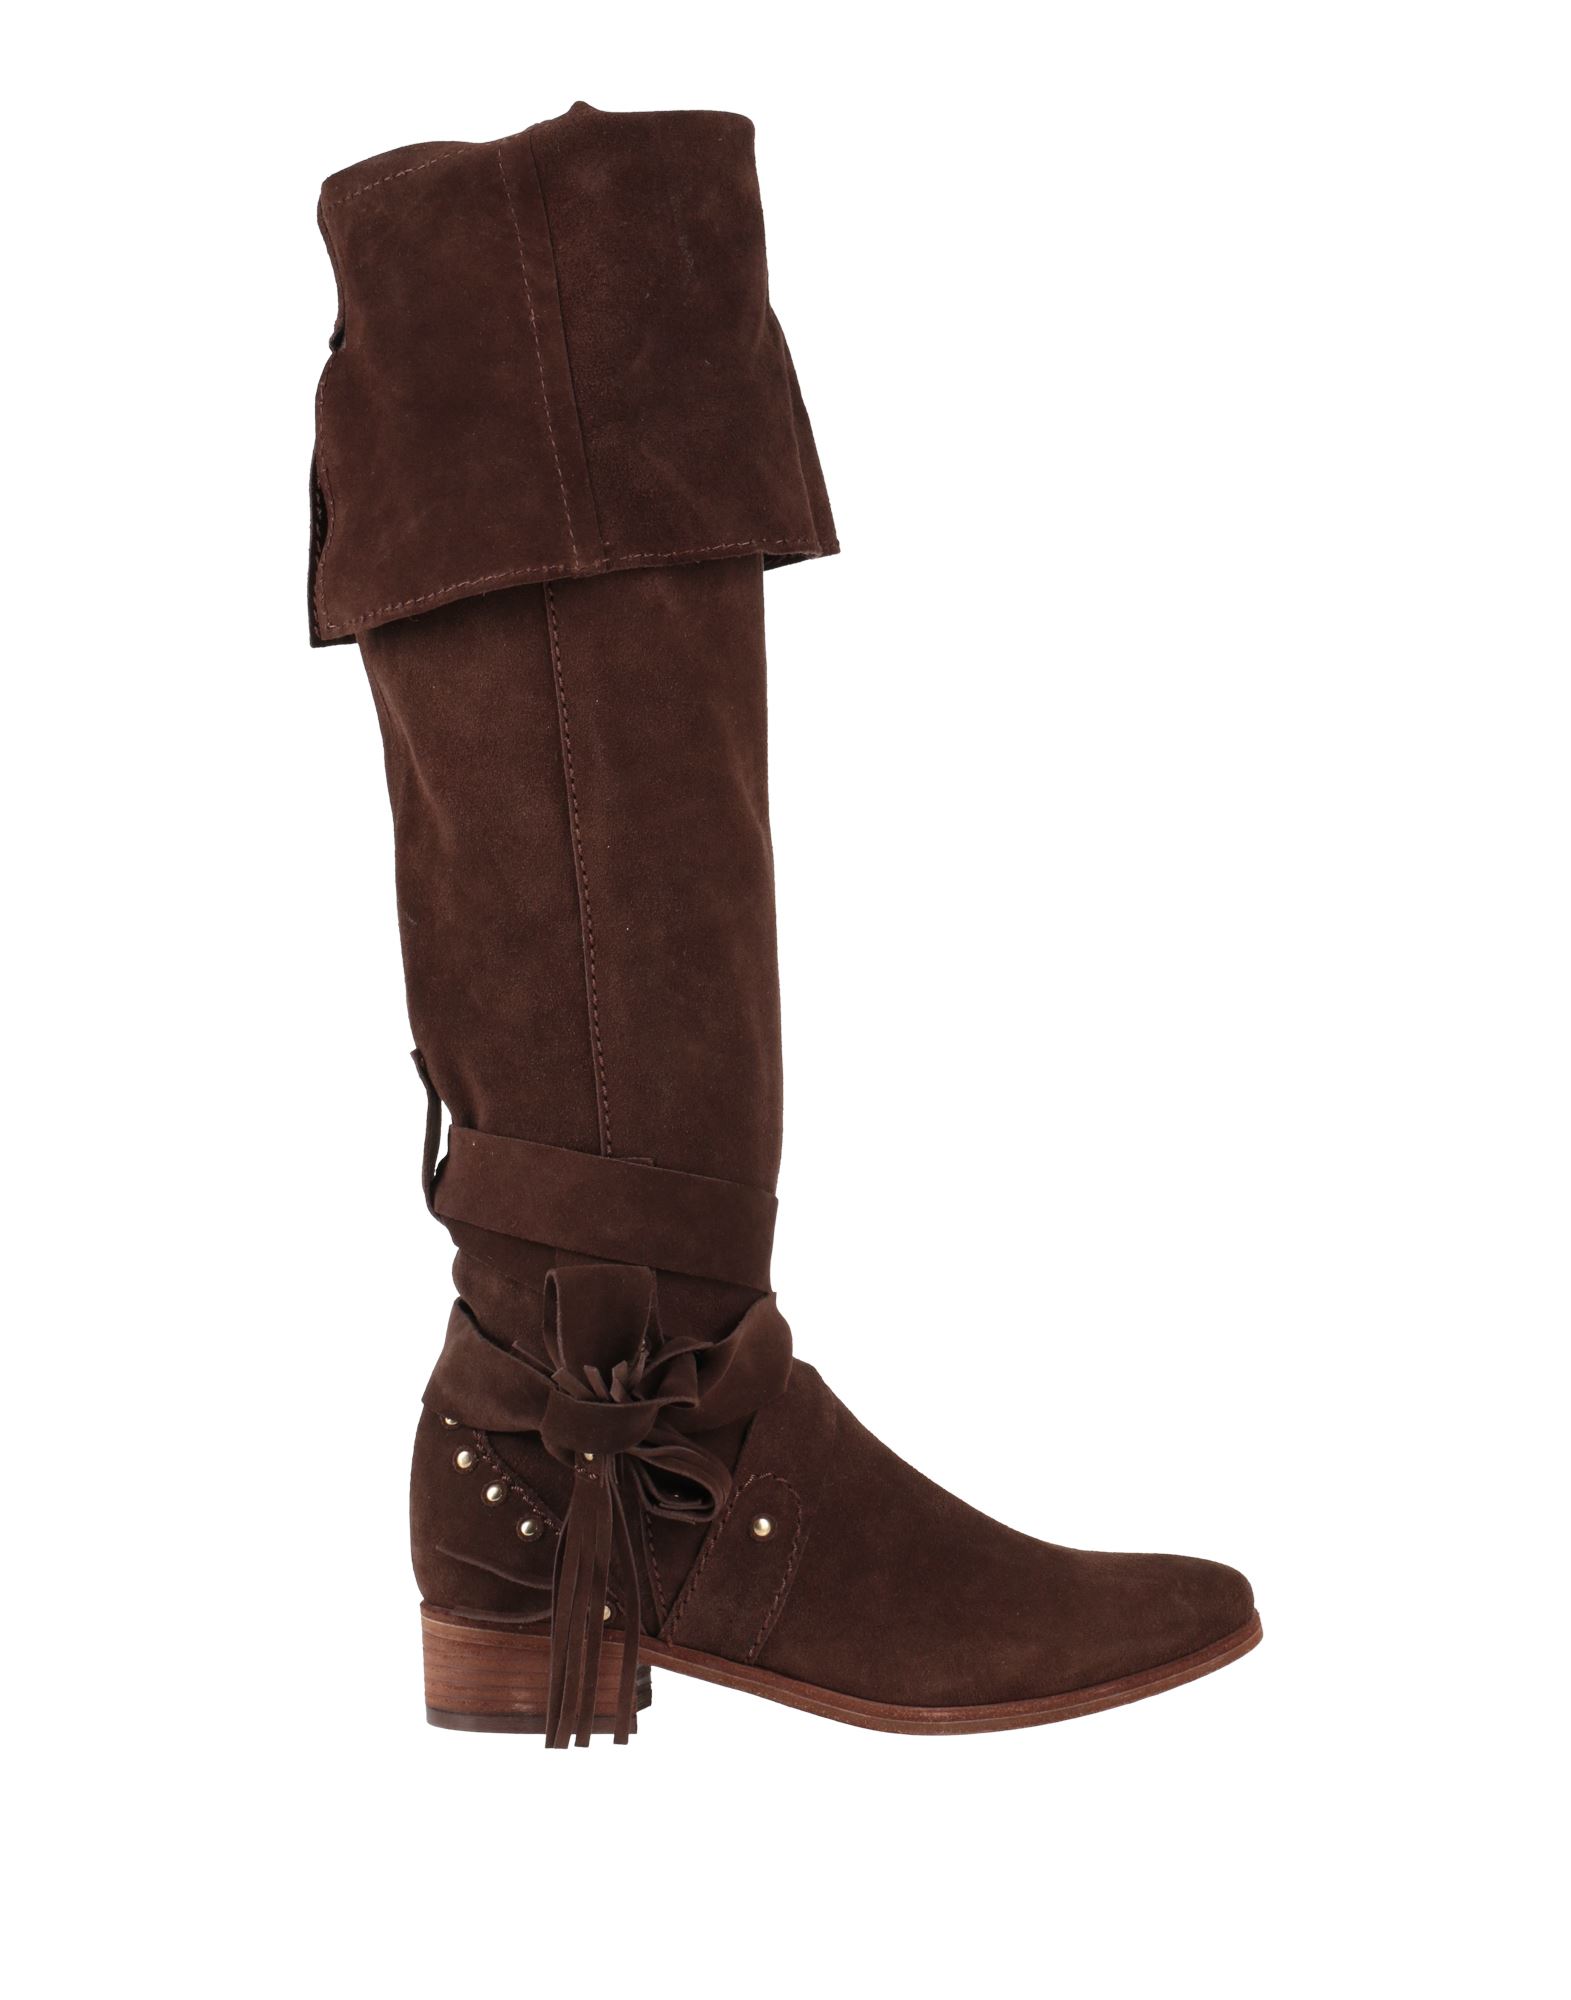 SEE BY CHLOÉ SEE BY CHLOÉ WOMAN KNEE BOOTS COCOA SIZE 7 SOFT LEATHER,11449043RT 7